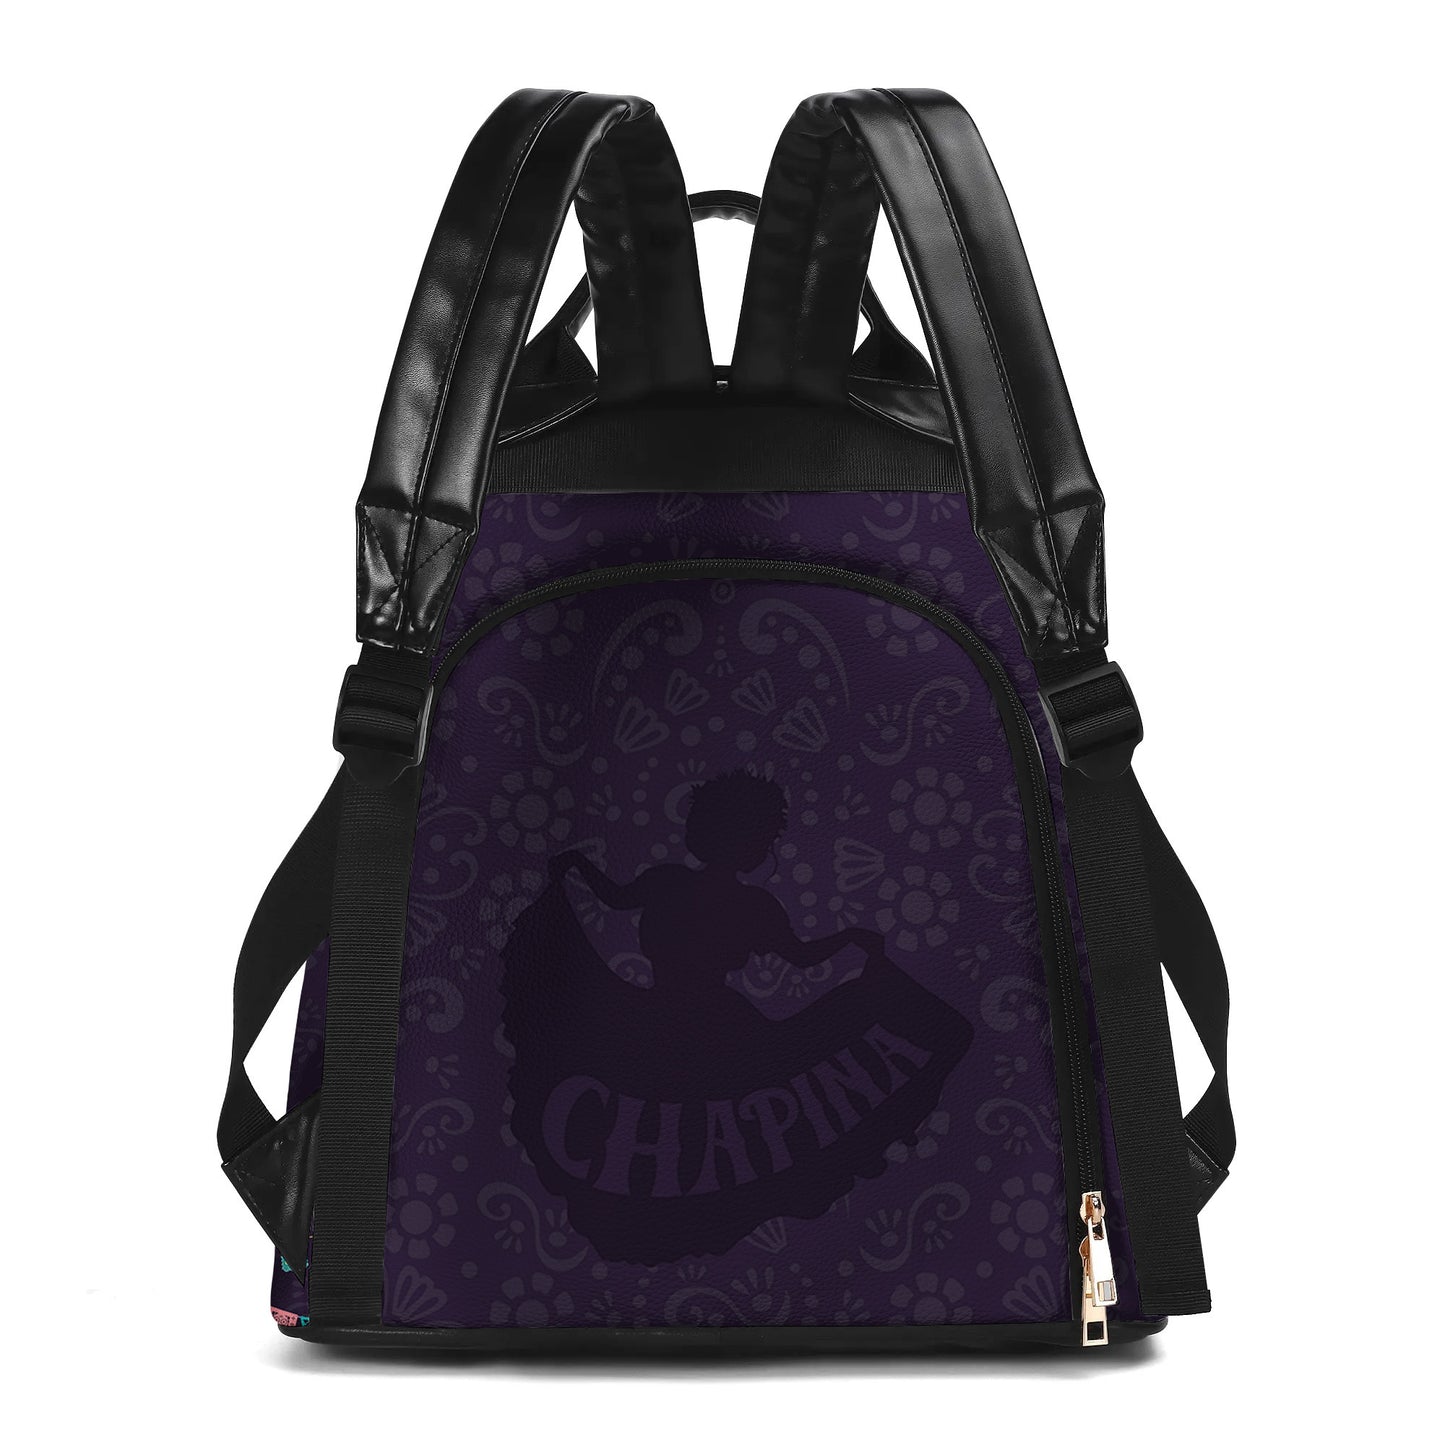 Chapina - Personalized Leather BackPack - LA005_BP